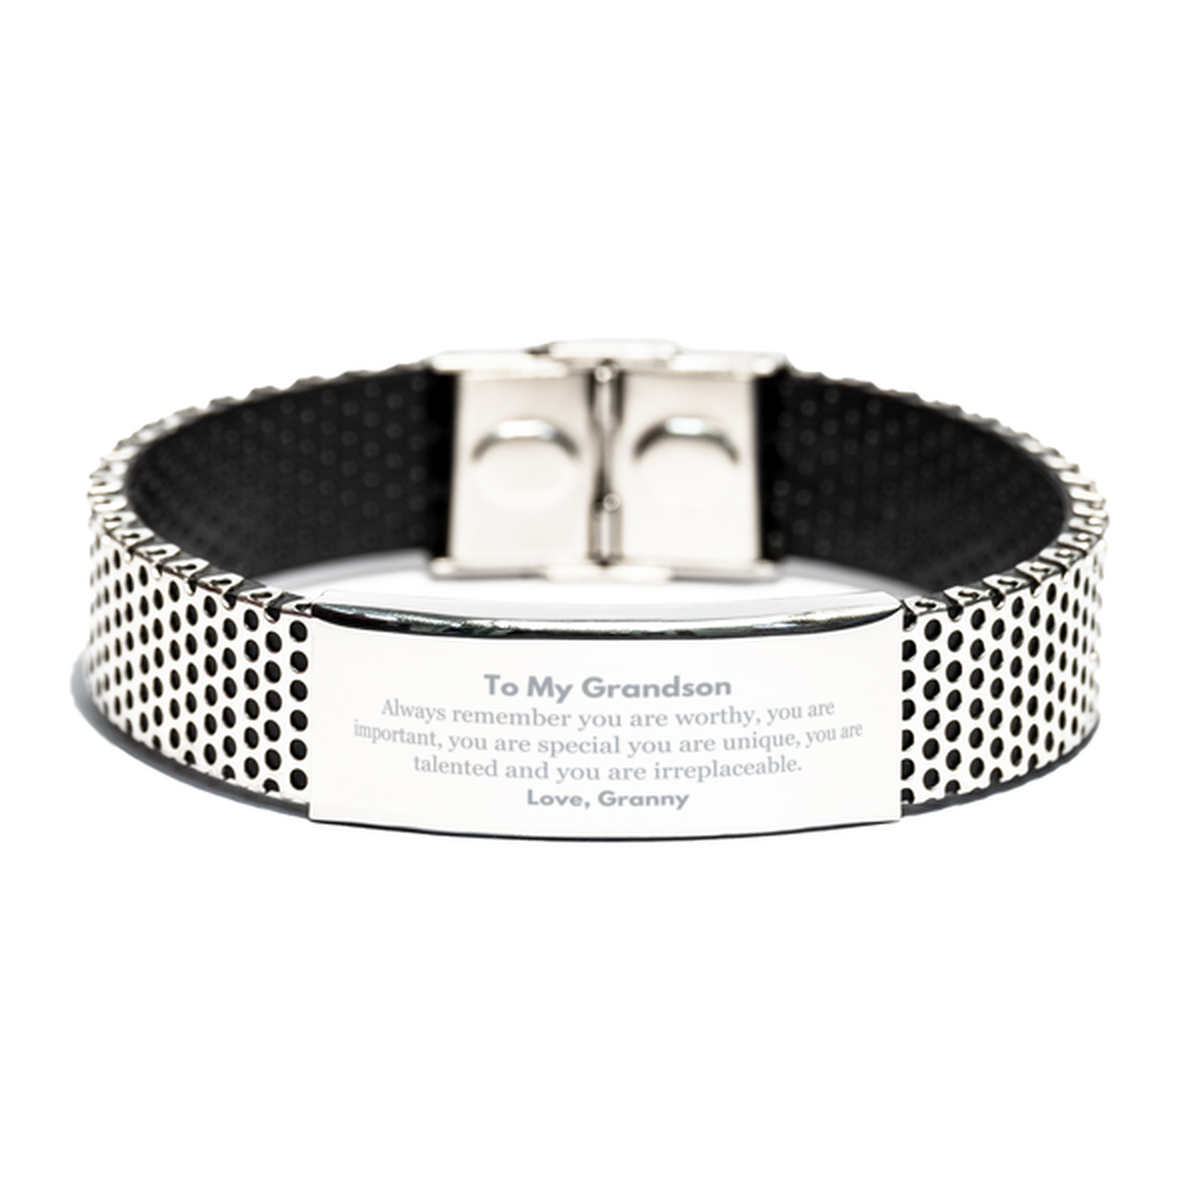 Grandson Birthday Gifts from Granny, Inspirational Stainless Steel Bracelet for Grandson Christmas Graduation Gifts for Grandson Always remember you are worthy, you are important. Love, Granny